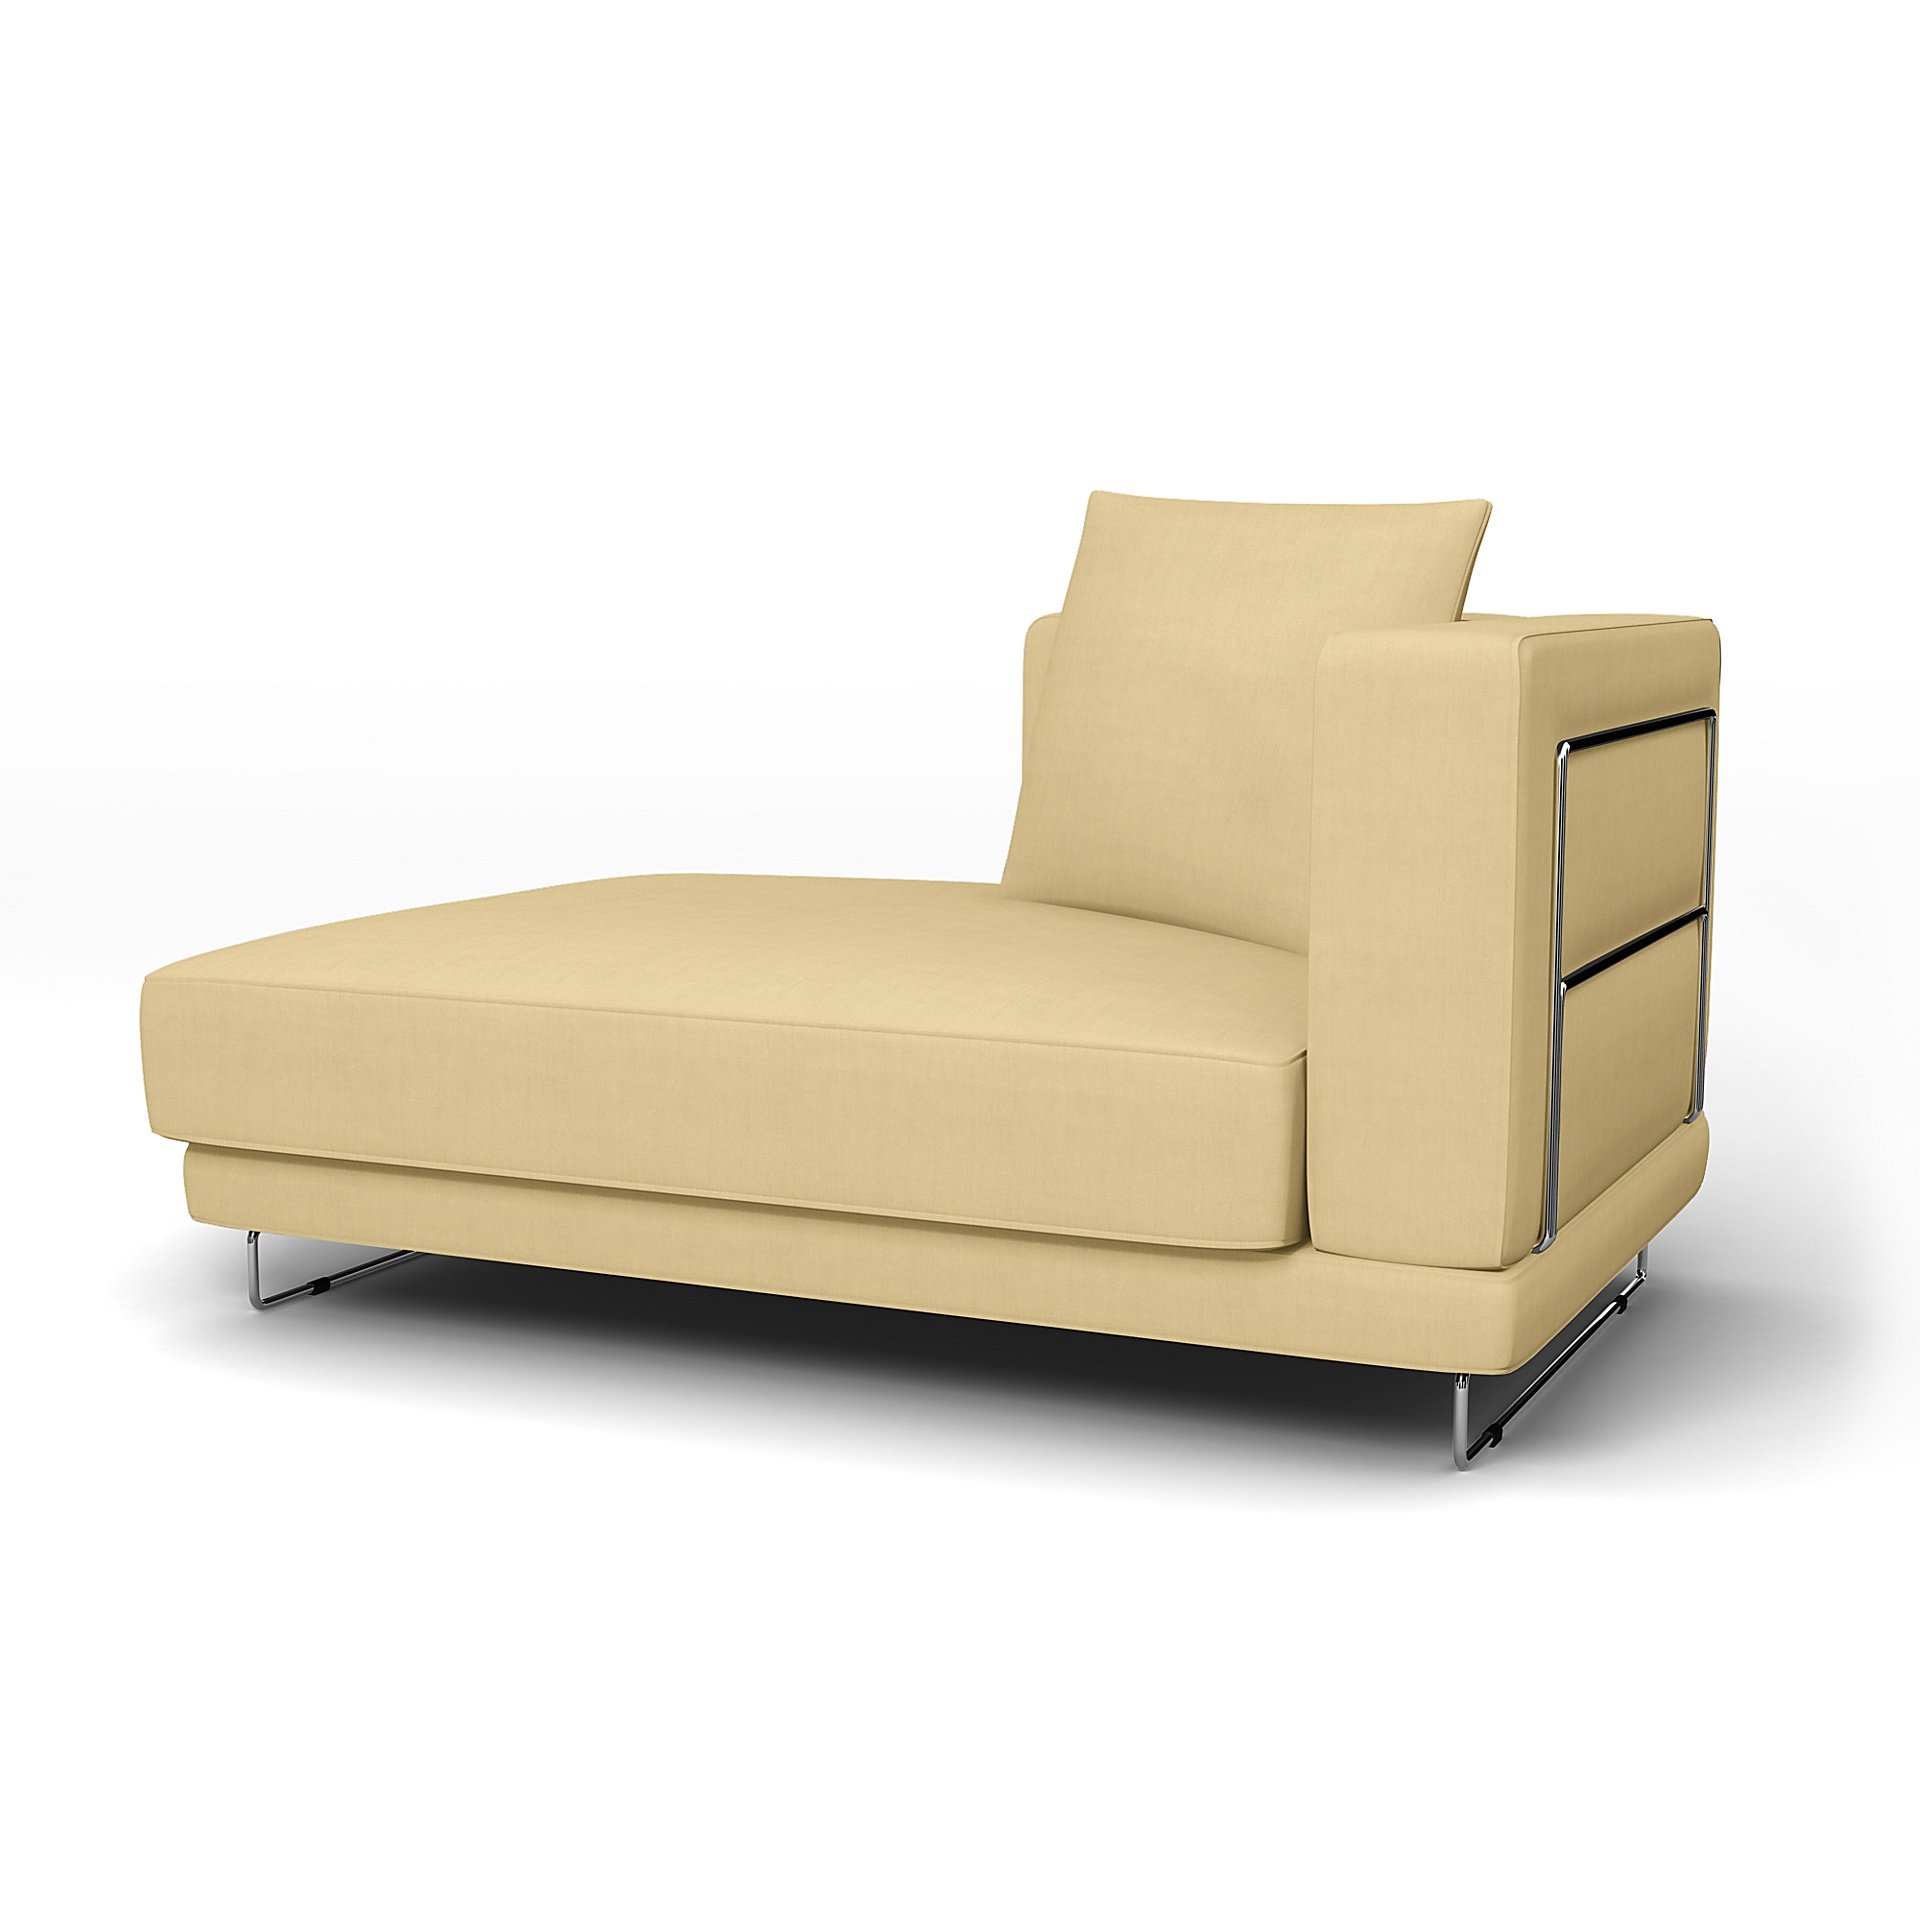 IKEA - Tylosand Chaise with Left Armrest Cover, Straw Yellow, Linen - Bemz